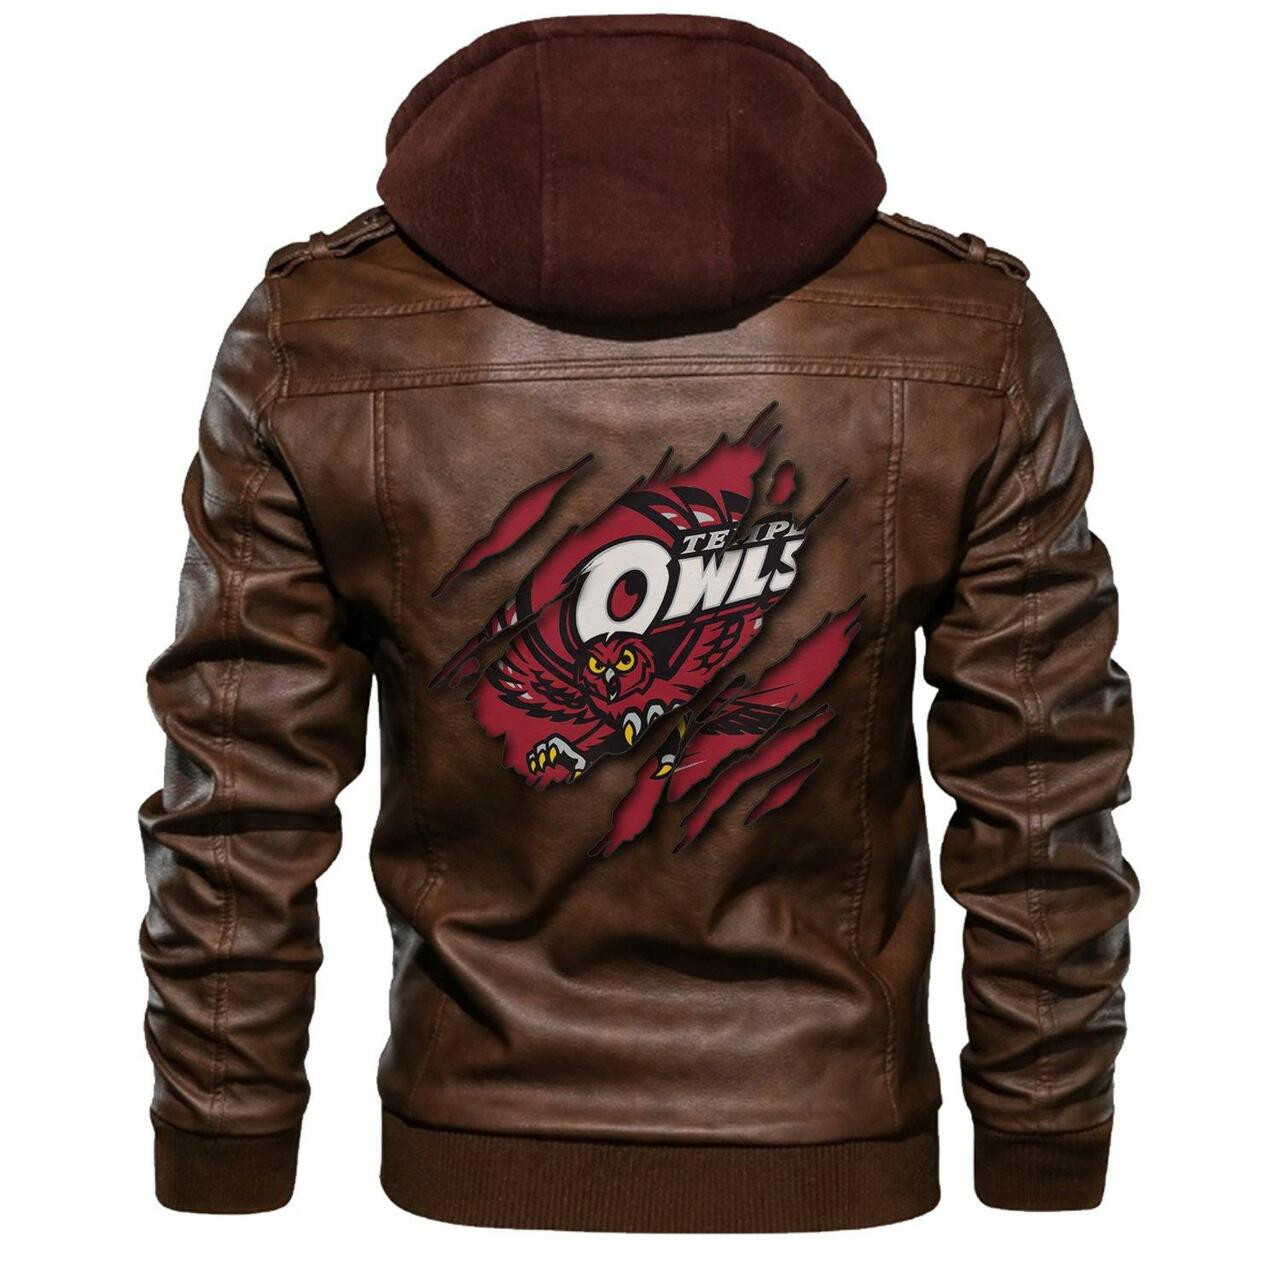 This leather Jacket will look great on you and make you stand out from the crowd 231